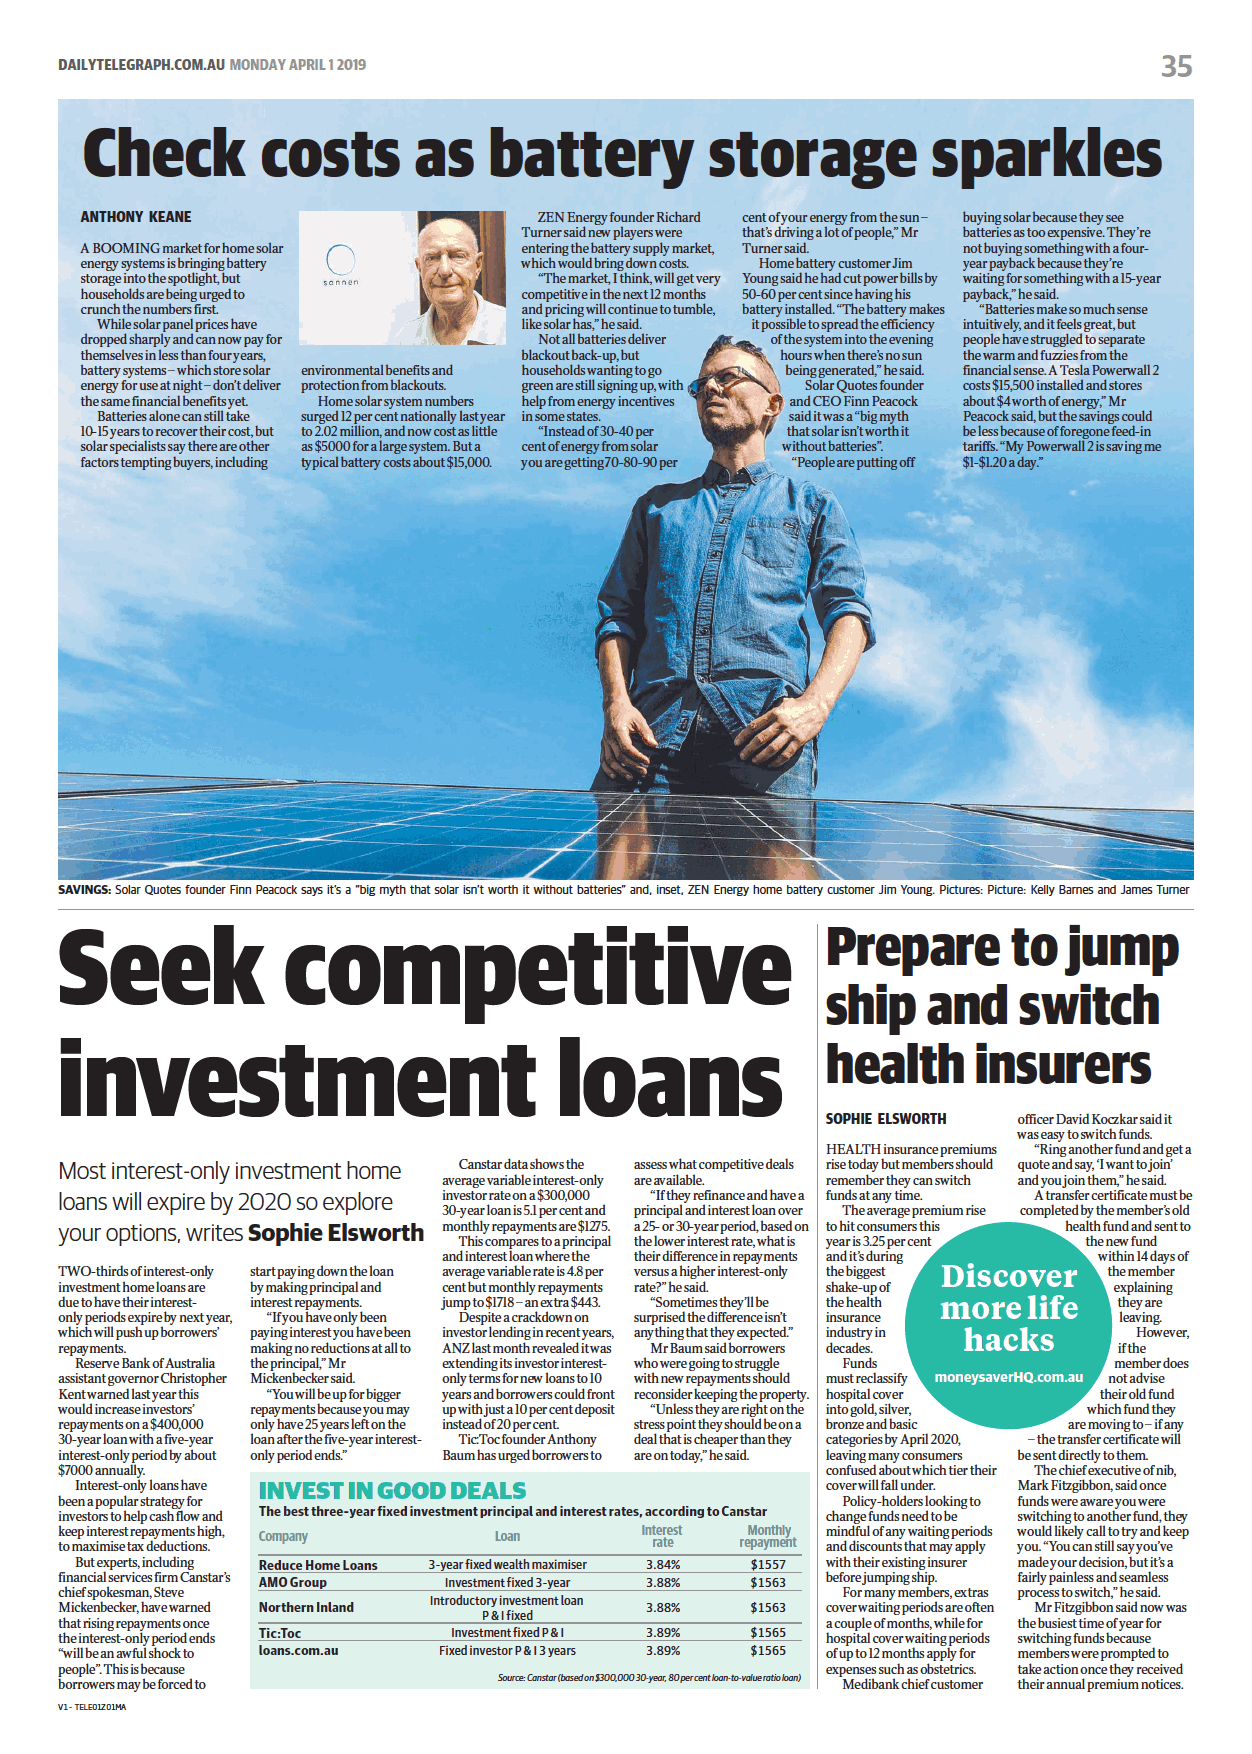 SolarQuotes - The Daily Telegraph MoneySaverHQ 1.png